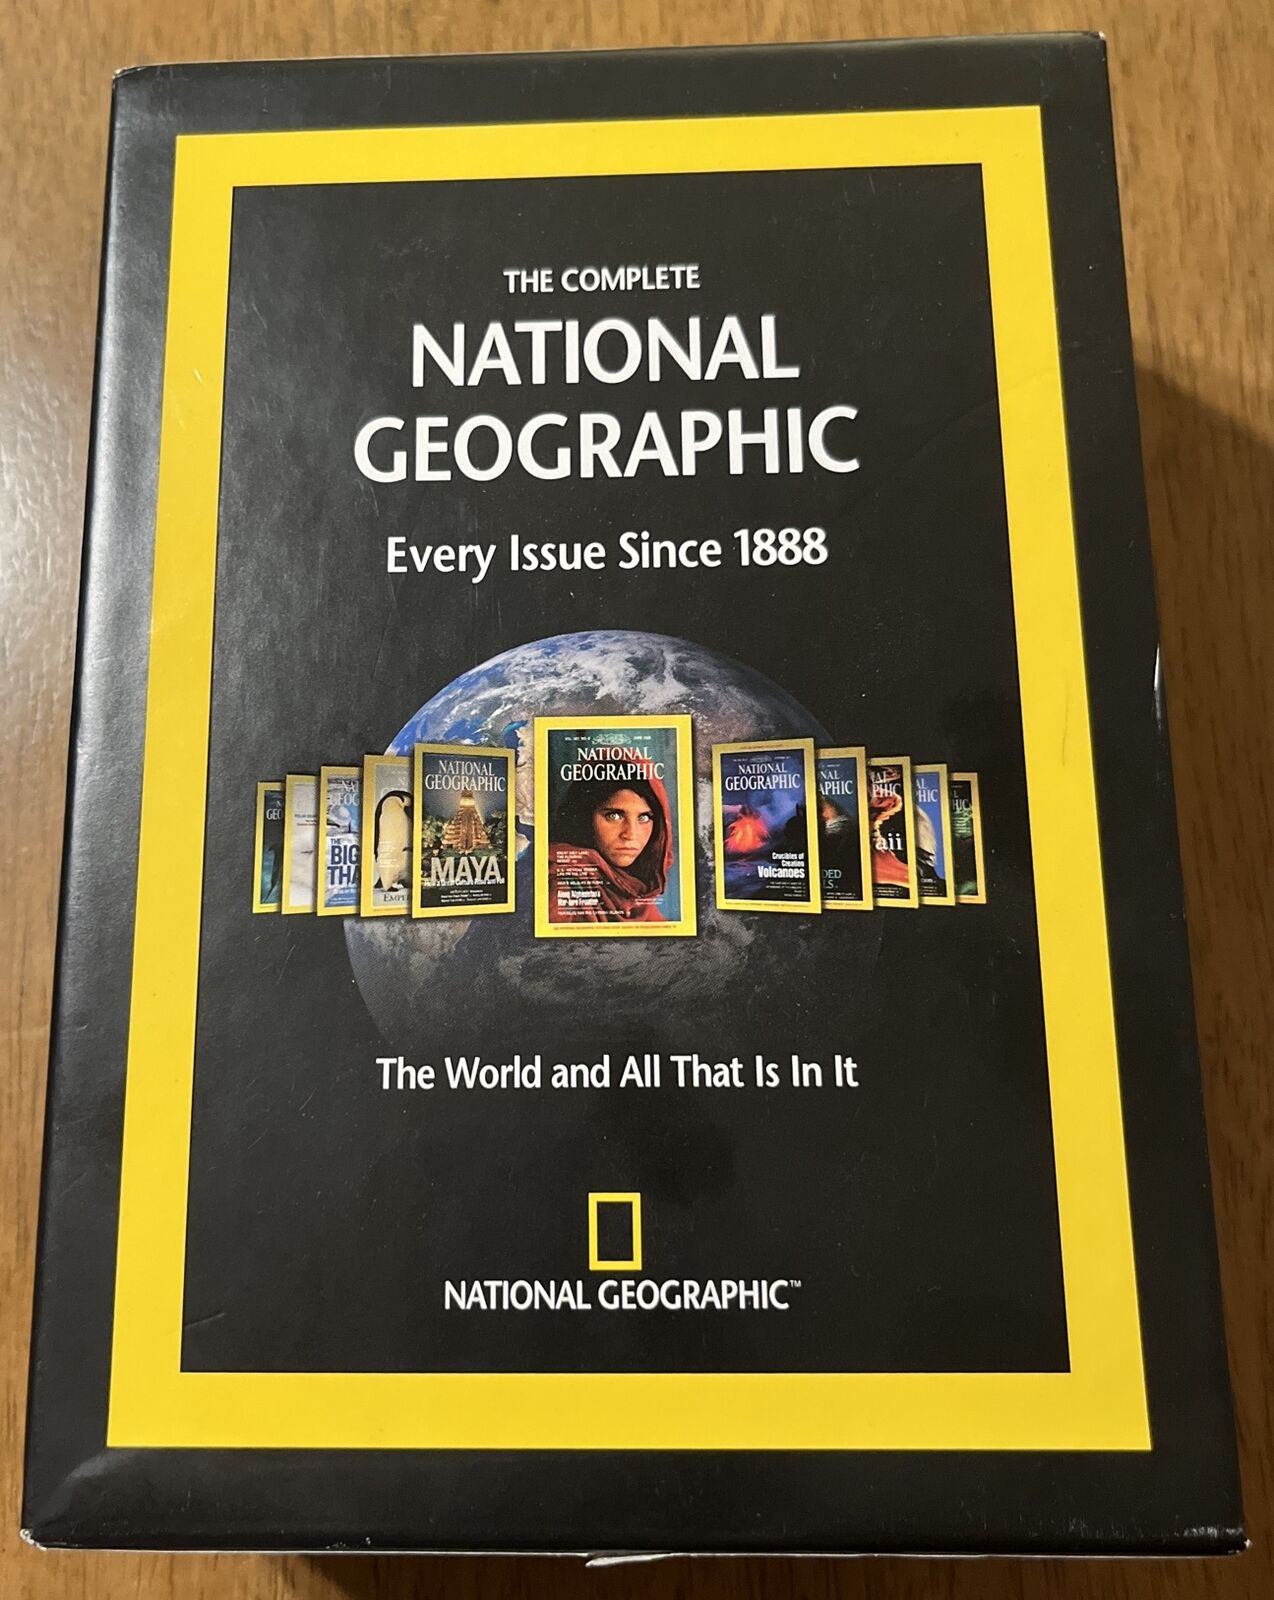 The Complete National Geographic Every Issue 1888-2008 WIN MAC DVD-ROM Disc Set 